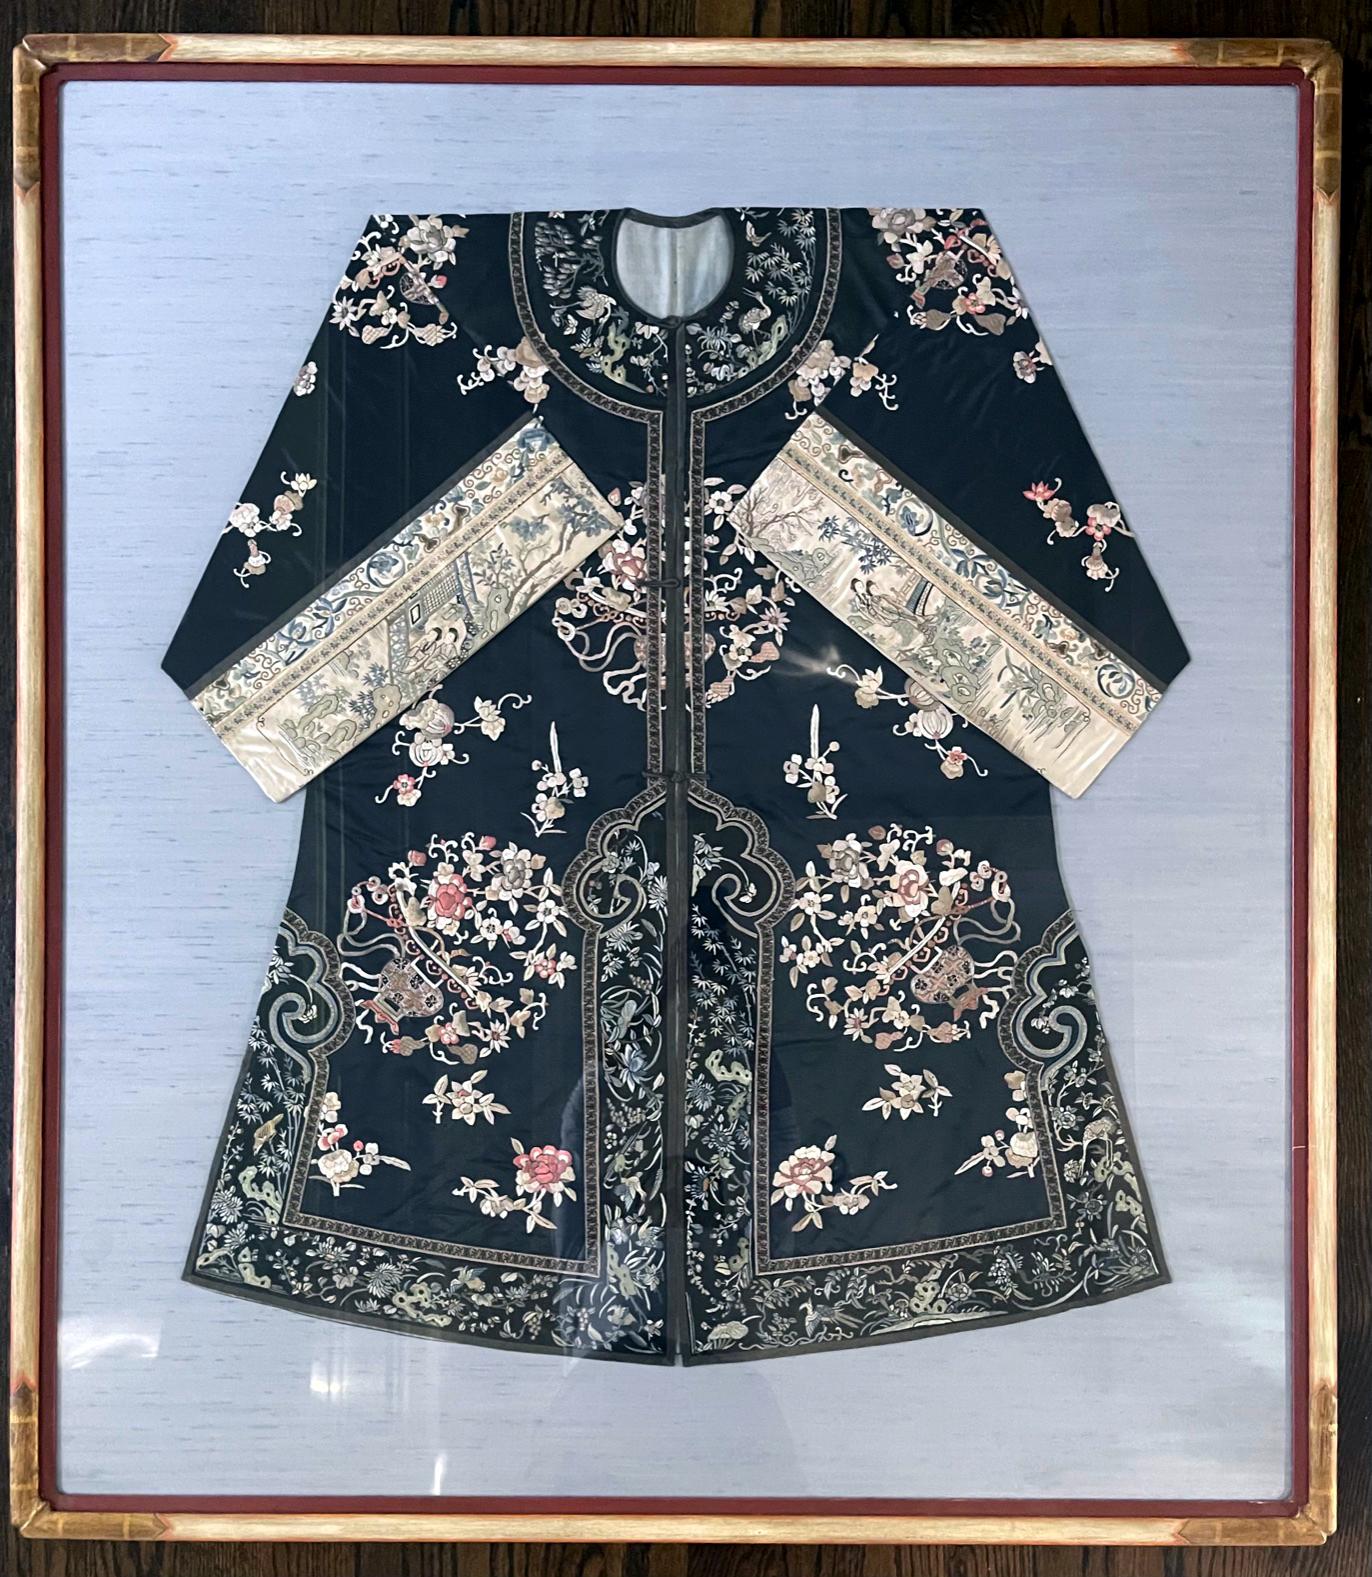 A woman's coat made of black silk with wide sleeves from Chinese late Qing Dynasty (mid to late 19th century), mounted and presented on blue linen board and framed as a stunning piece of textile art. The coat features white silk bands on wide